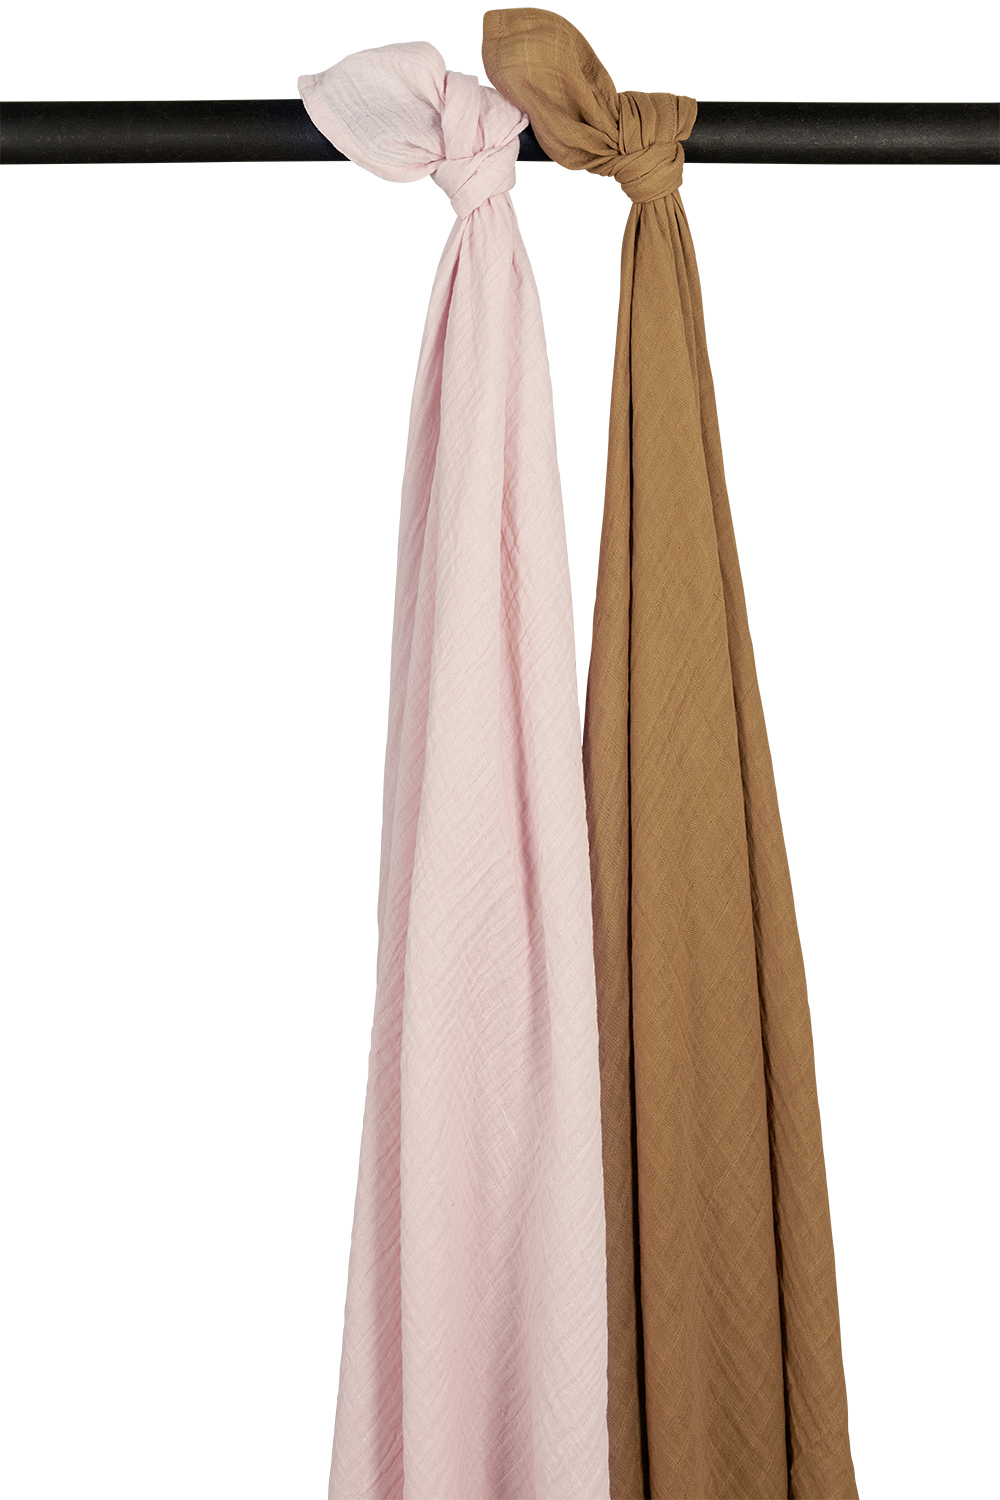 Swaddle 2-pack muslin Uni - soft pink/toffee - 120x120cm